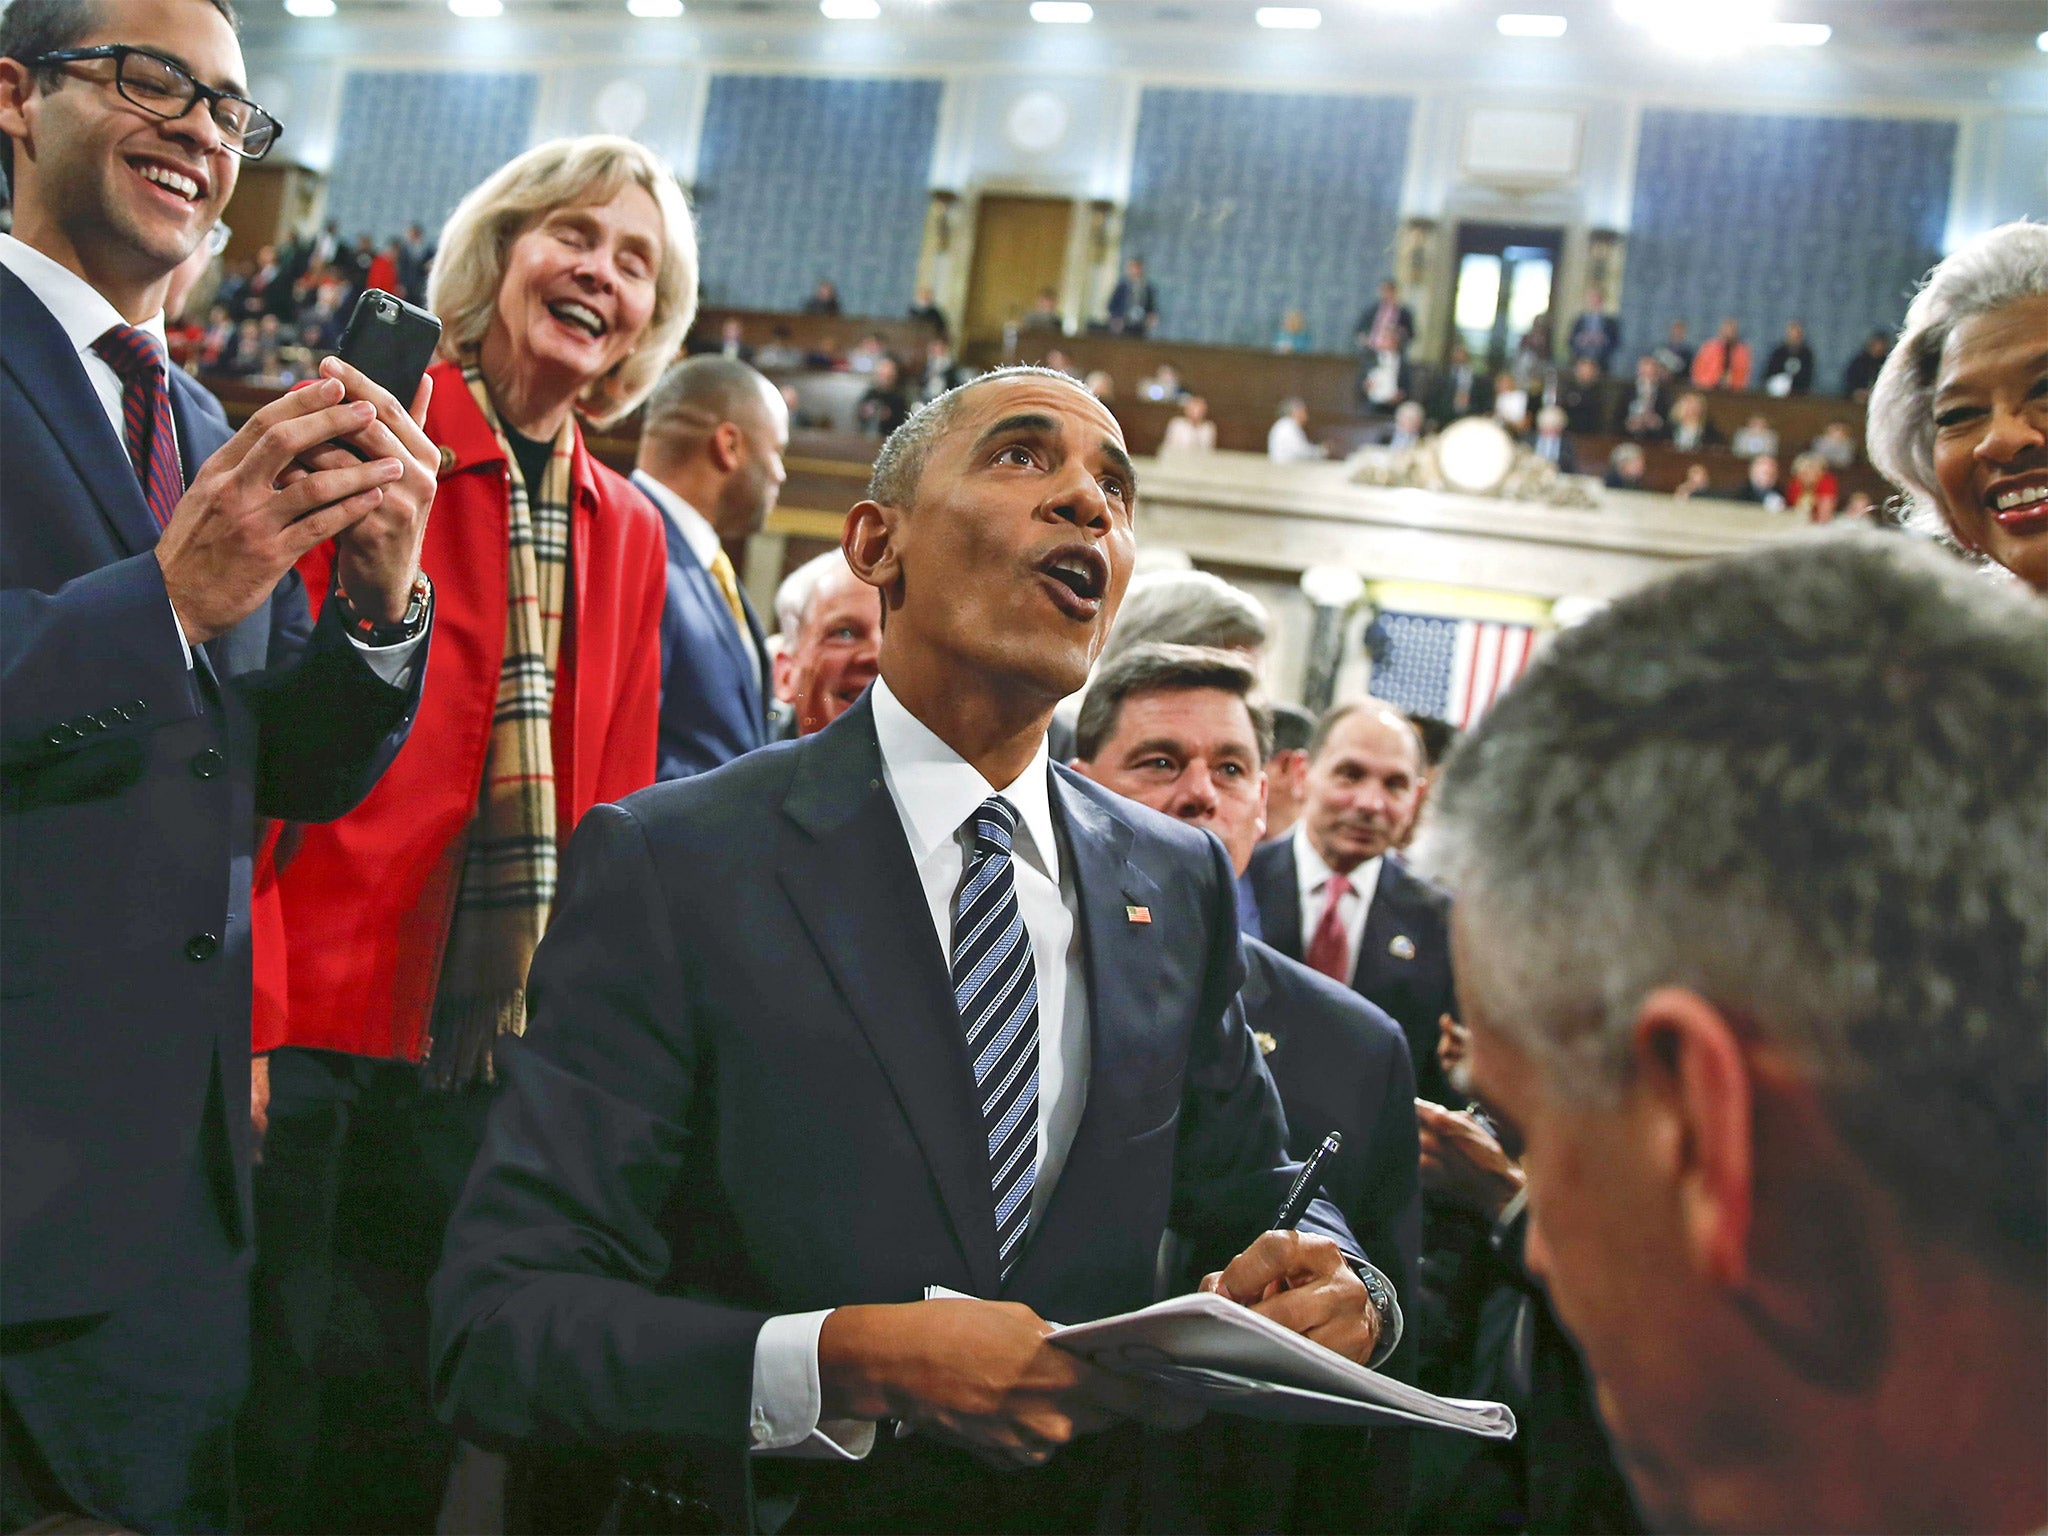 President Barack Obama signs autographs after his State of the Union speech